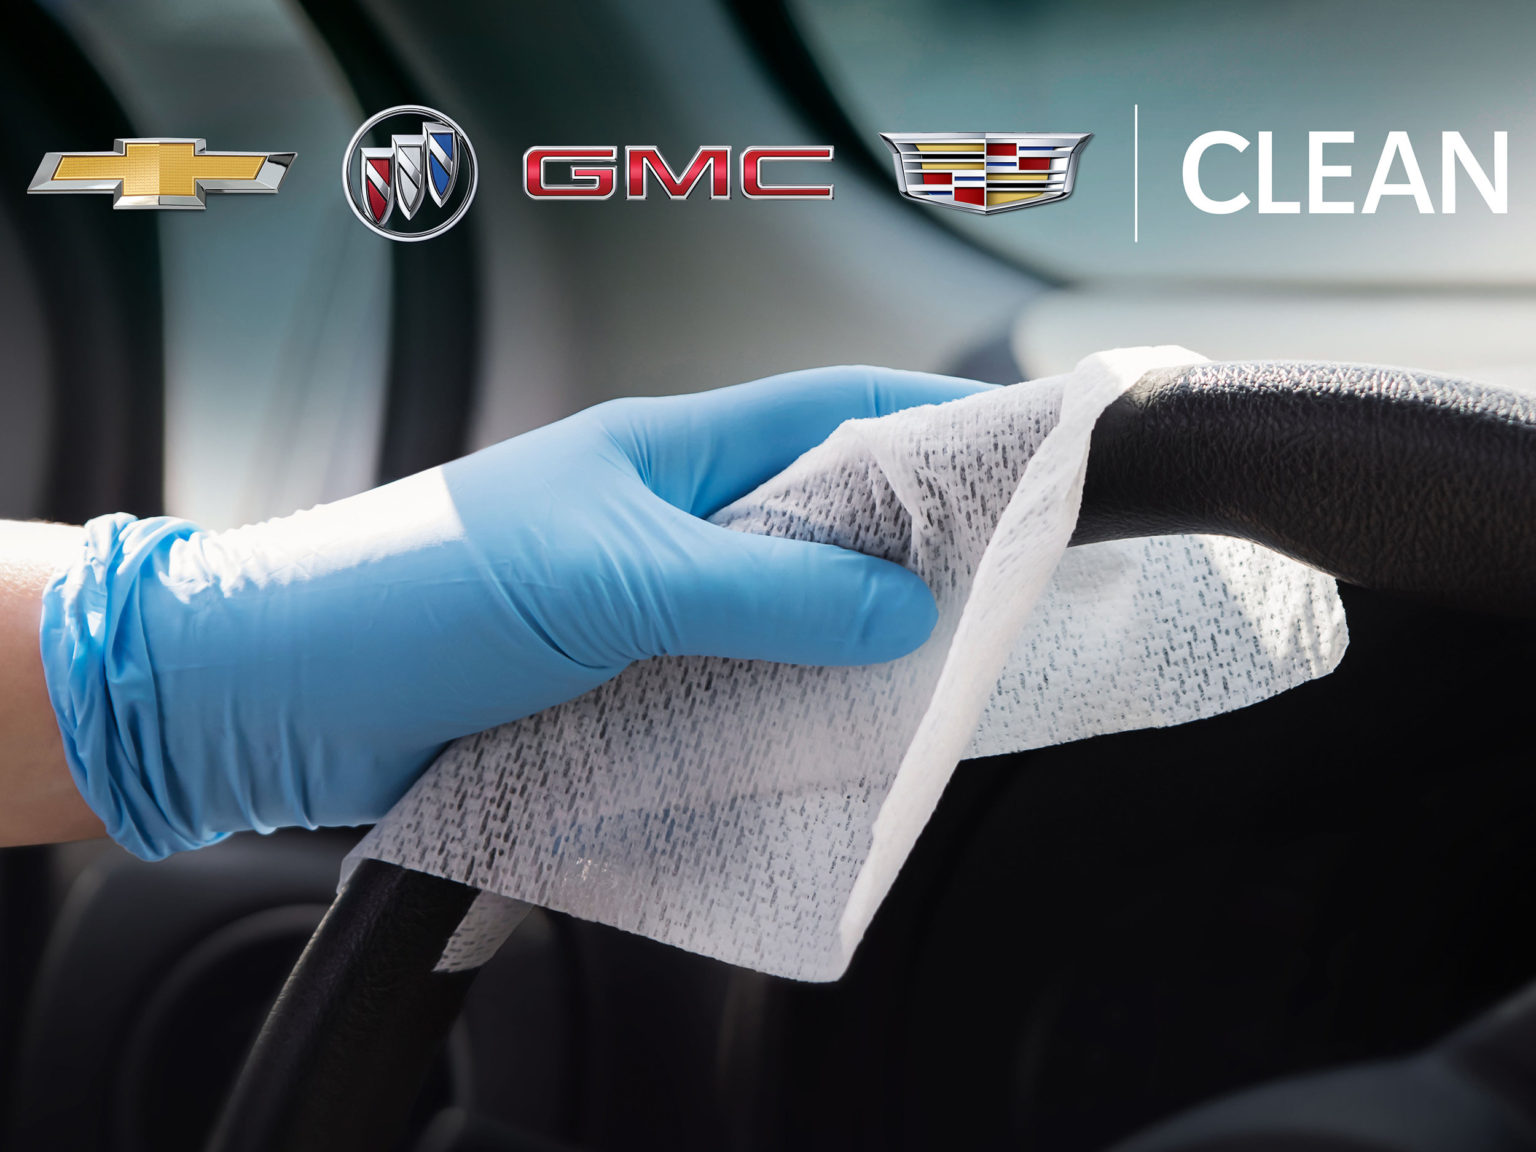 The new CLEAN dealership program uses CDC guidelines he ensure cleanliness.